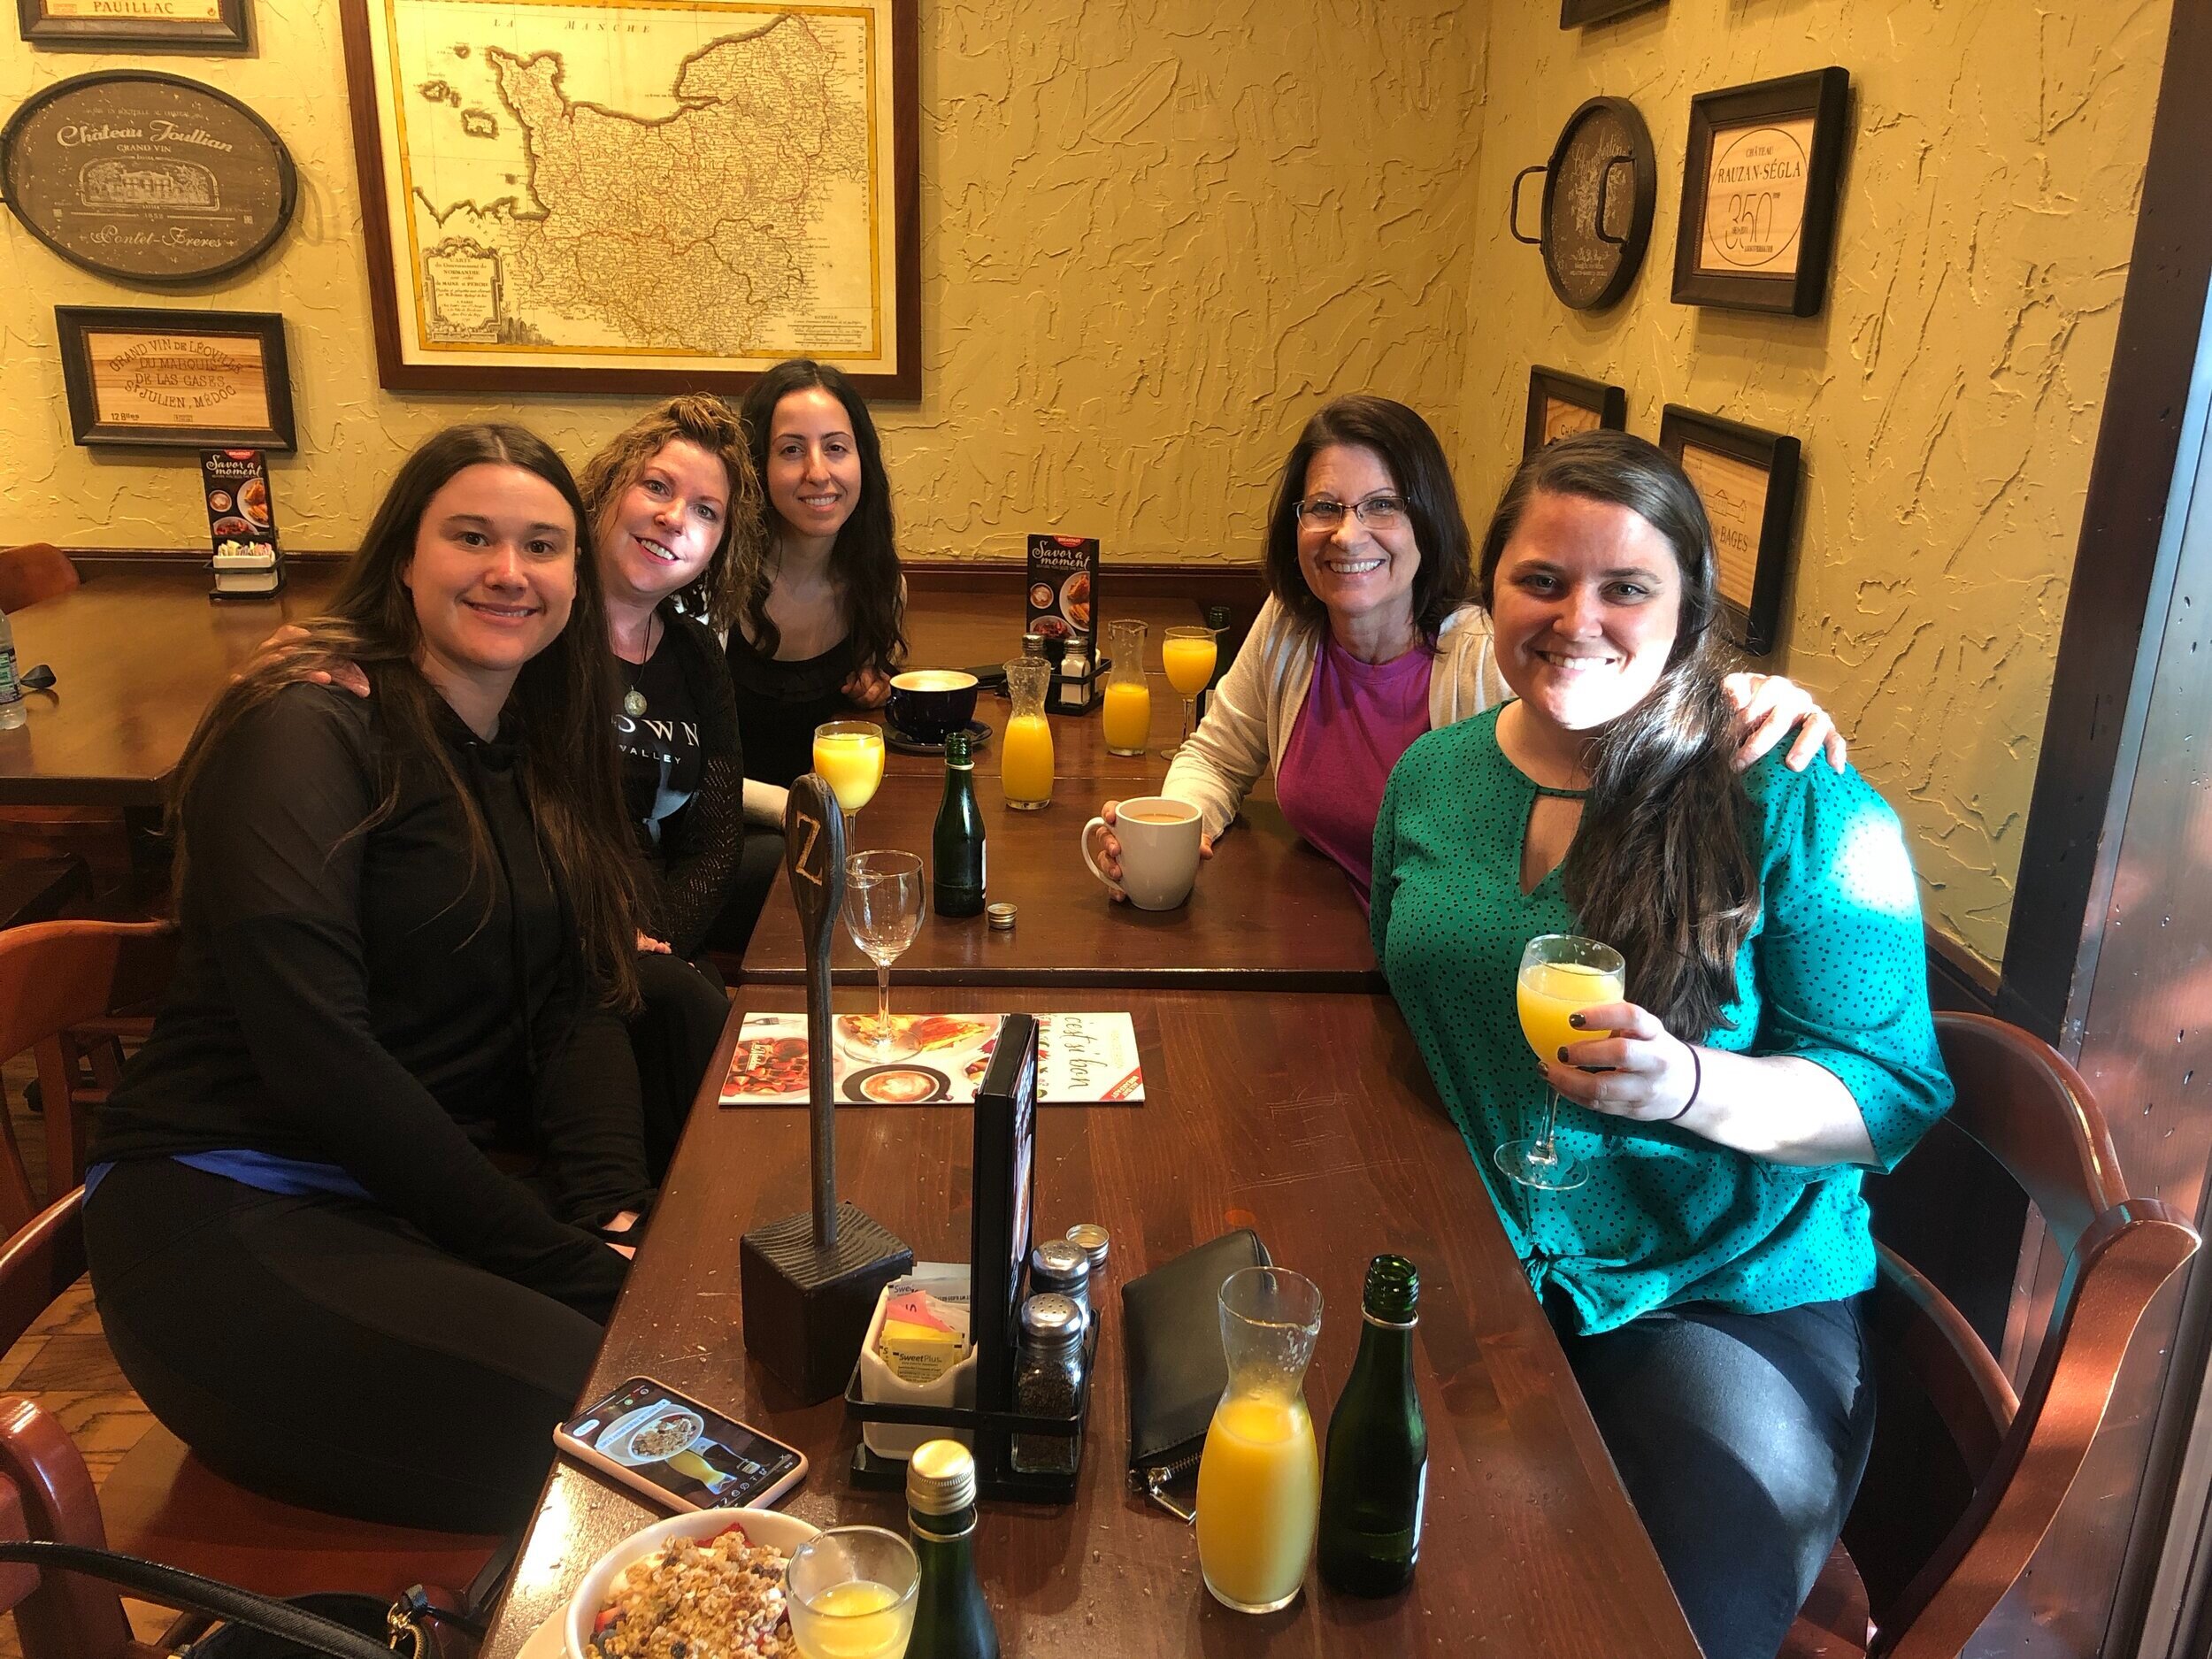 group of women enjoying mimosas and brunch during a girls day out on a girls trip vacation at at La Madeleine restaurant  in Orlando Florida